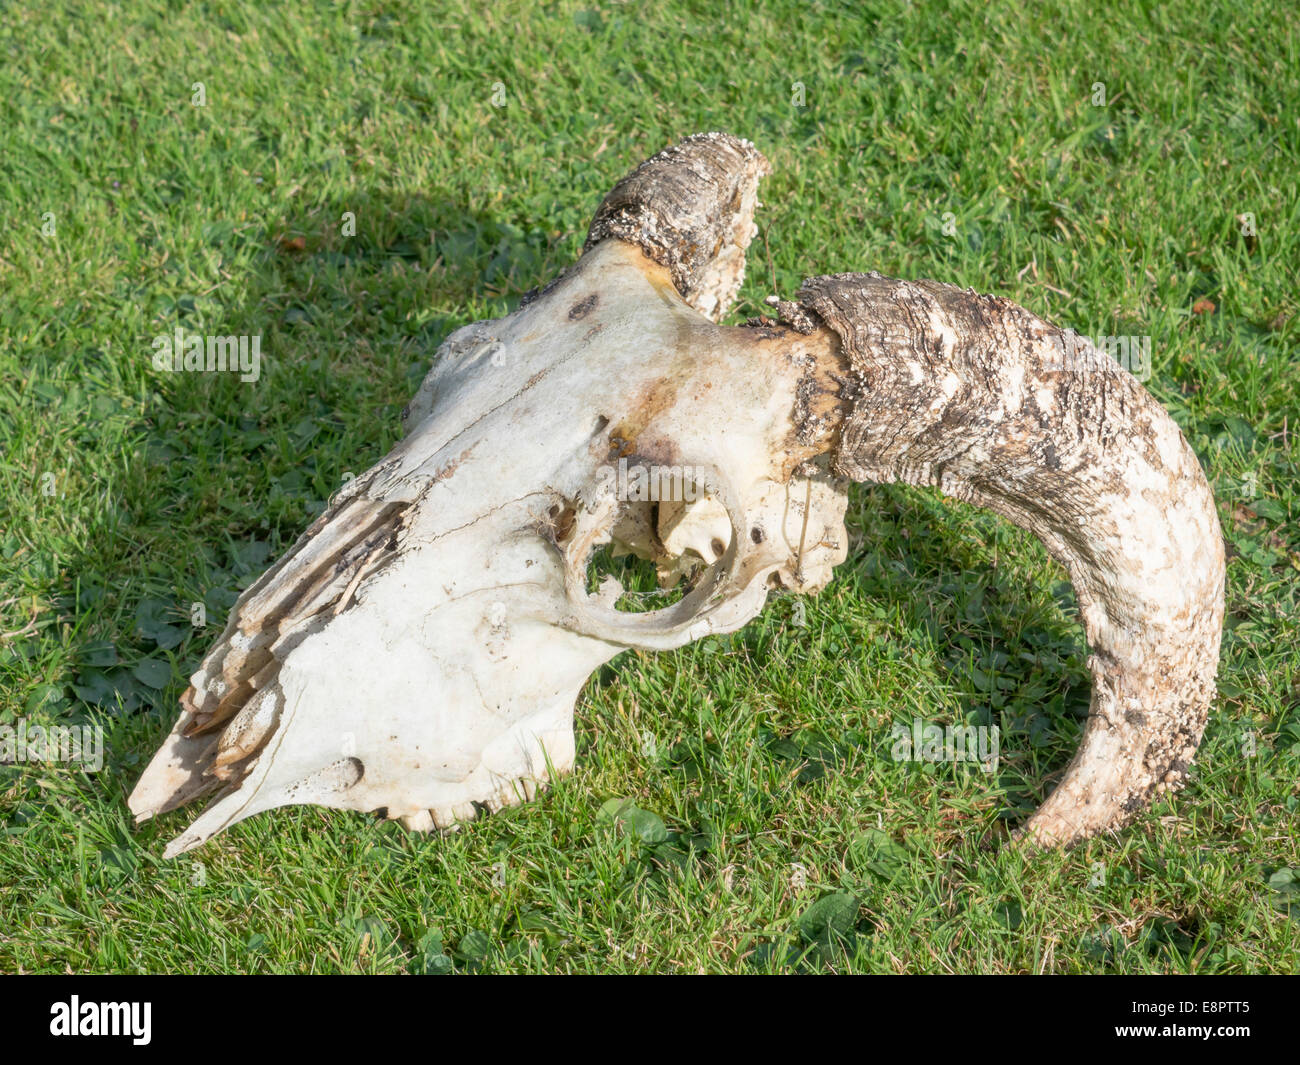 Decayed skull of a domestic sheep (Ovis aries) with strong curved horns lying on grass Stock Photo